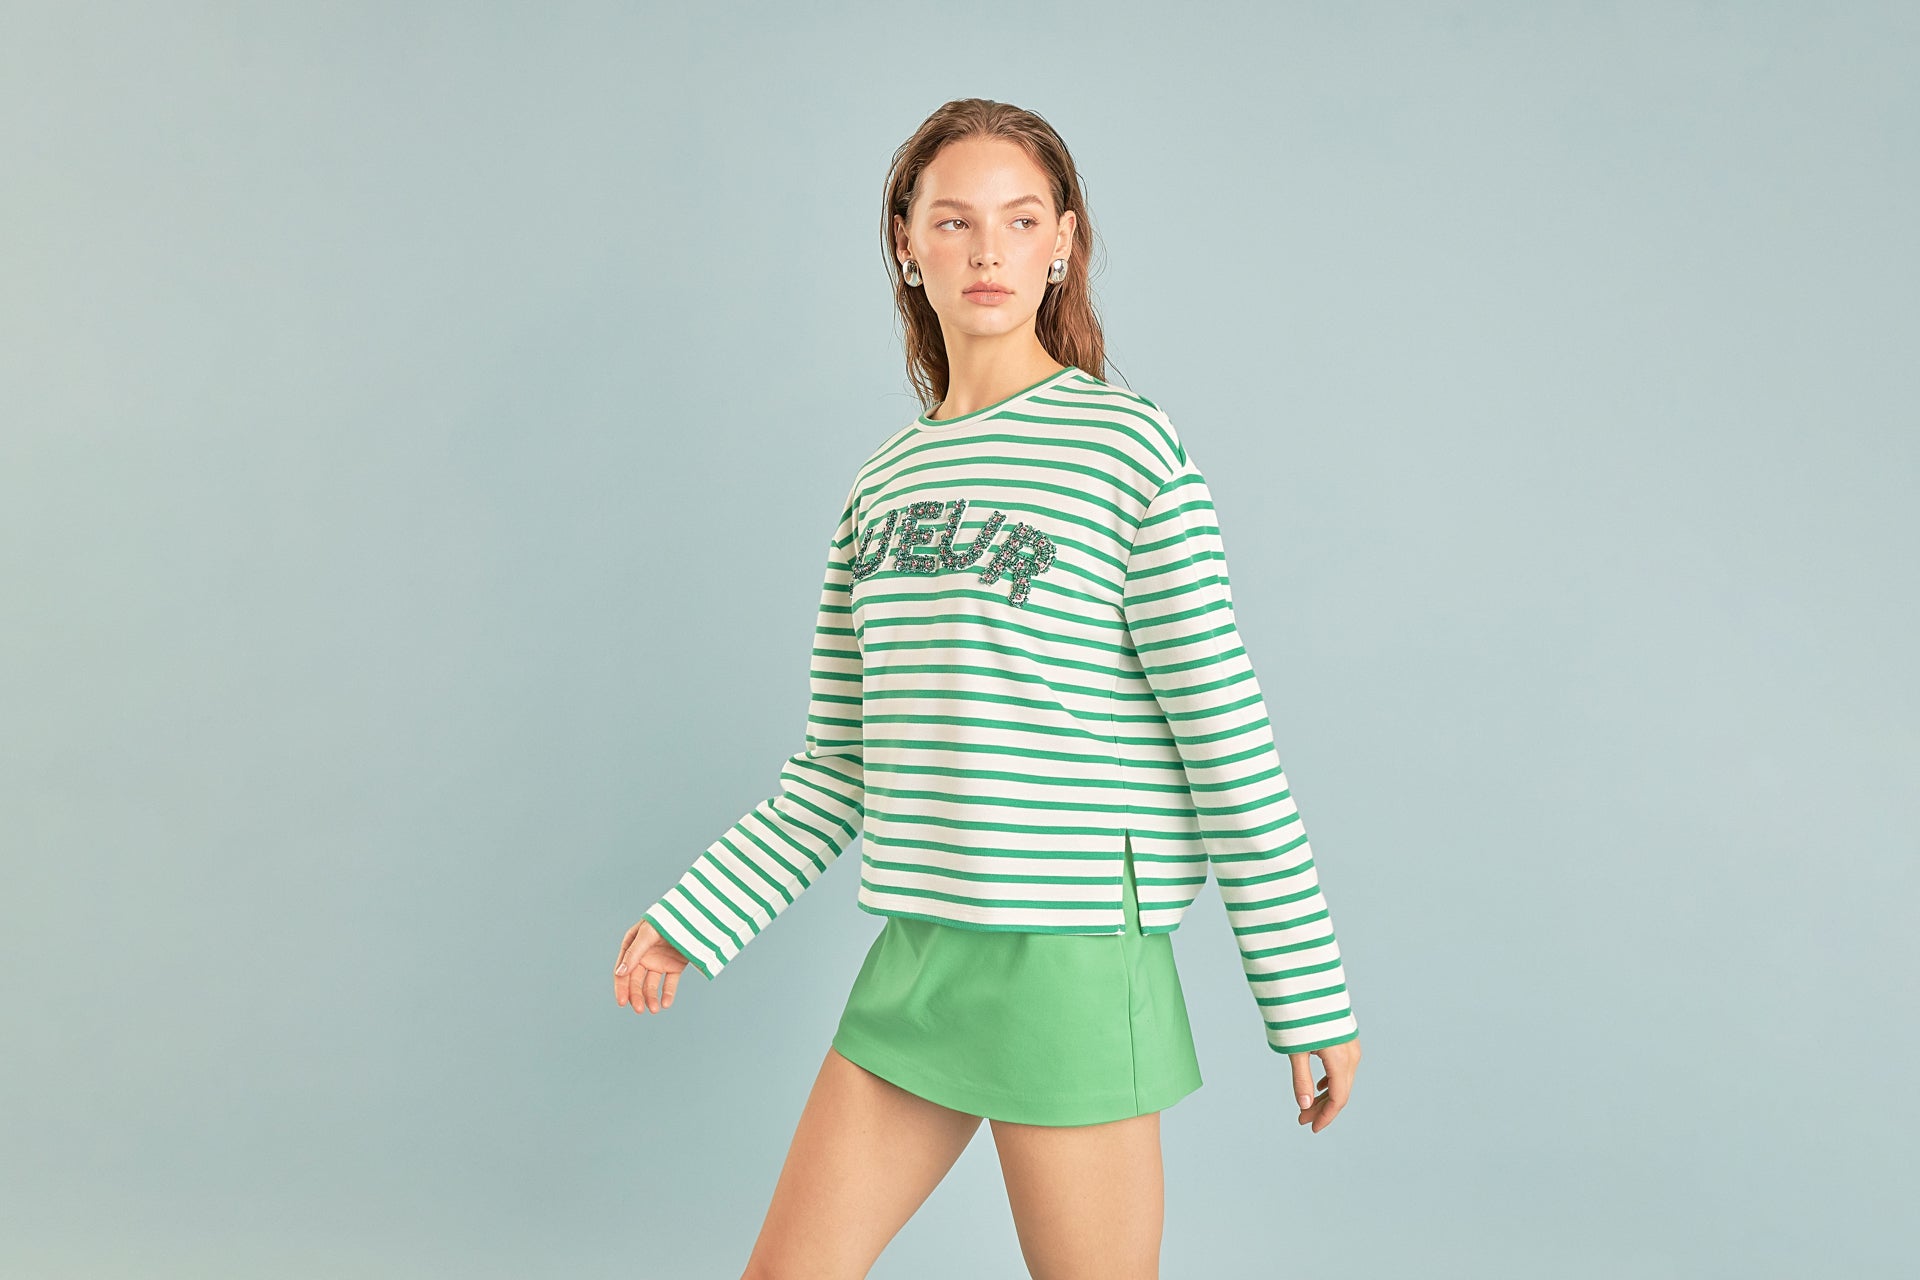 Shop the Green Lueur Embellished Striped Sweatshirt from Endless Rose